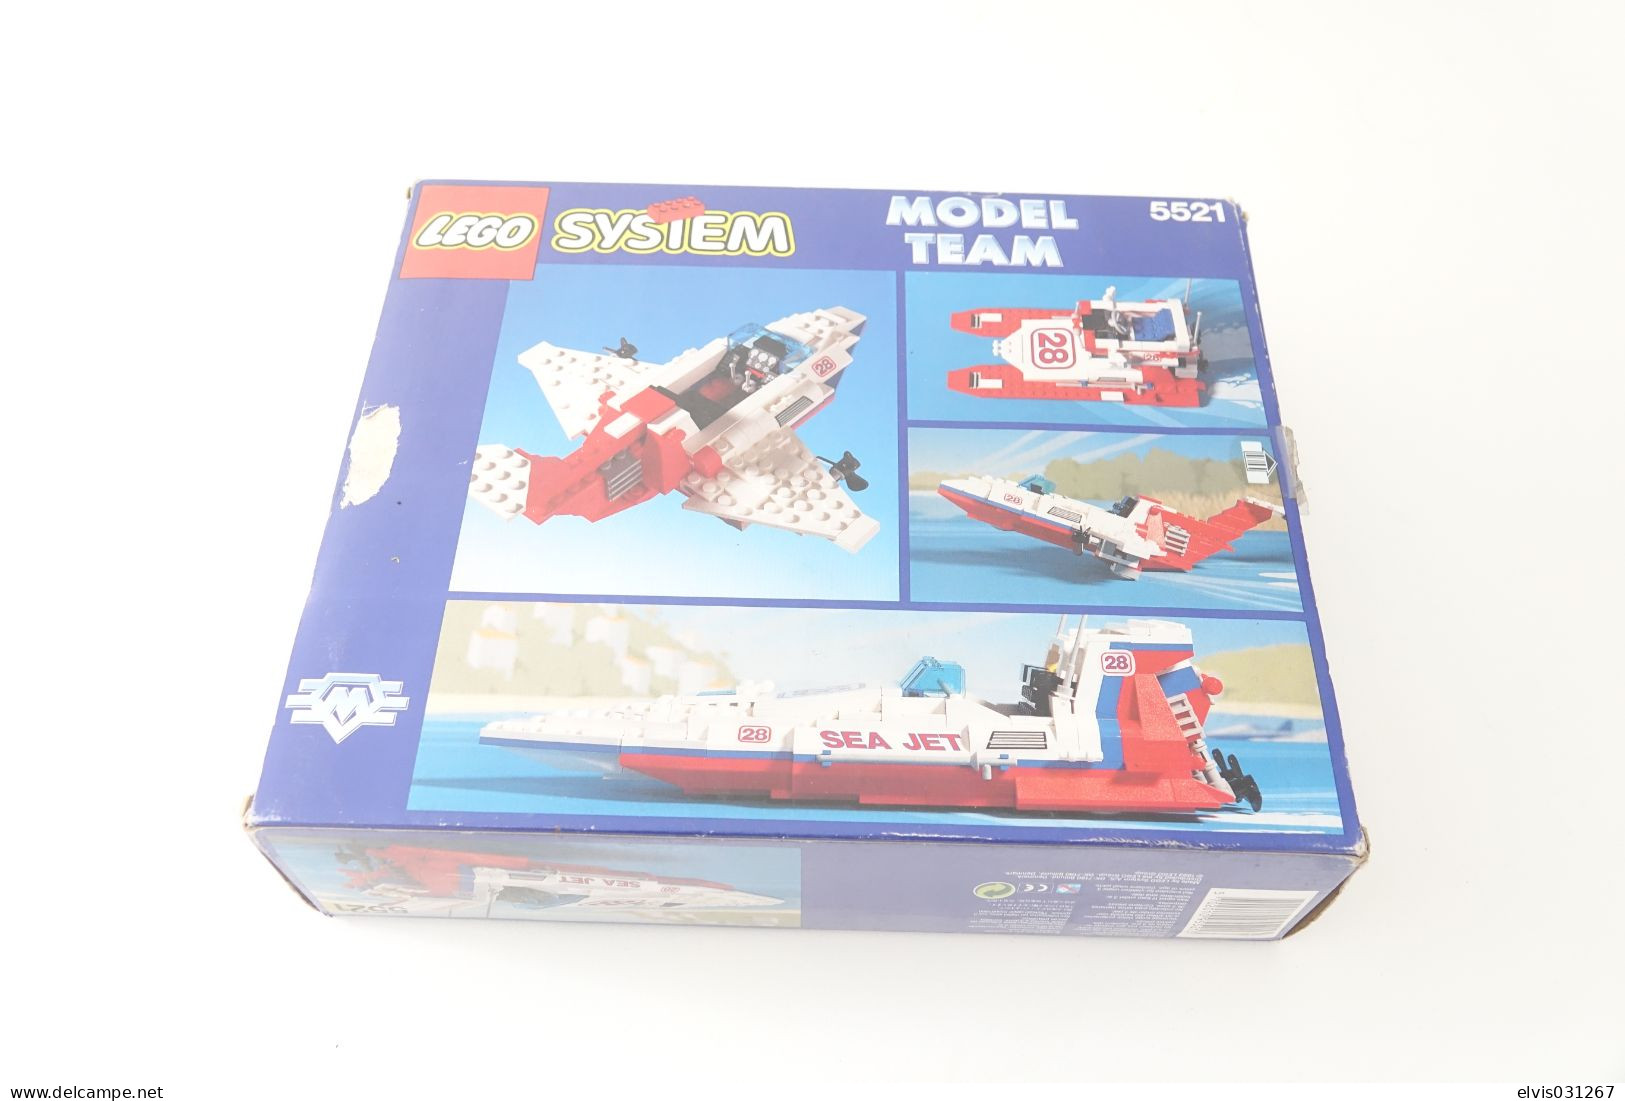 LEGO - 5521 Sea Jet With Box And Manual Booklet - Original Lego 1993 - Vintage - Catalogues